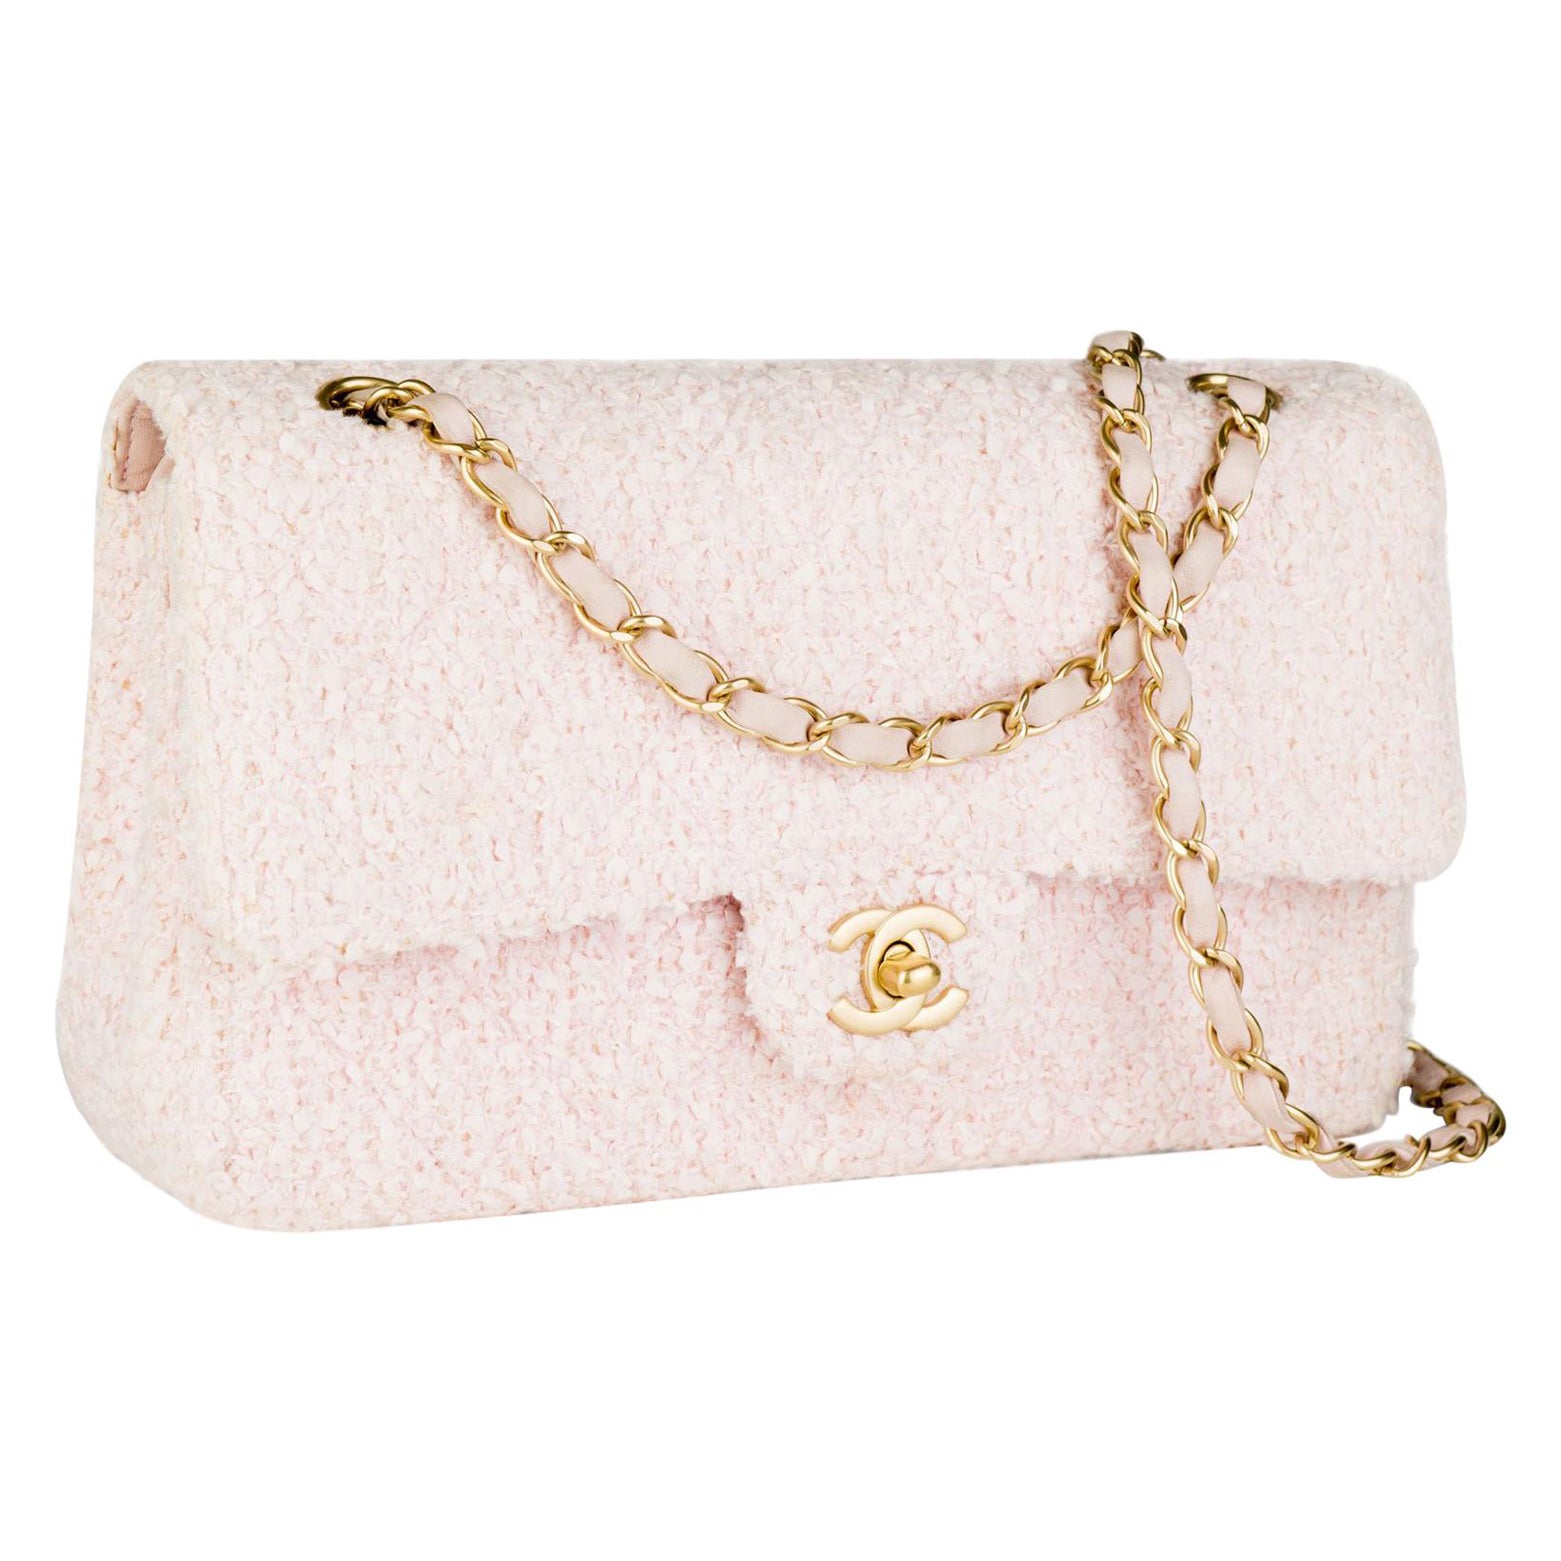 Sold at Auction: CHANEL, A CLASSIC CHANEL BEIGE PYTHON ULTRA STITCH FLAP  BAG WITH SILVER TONE HARDWARE CHANEL, 2012